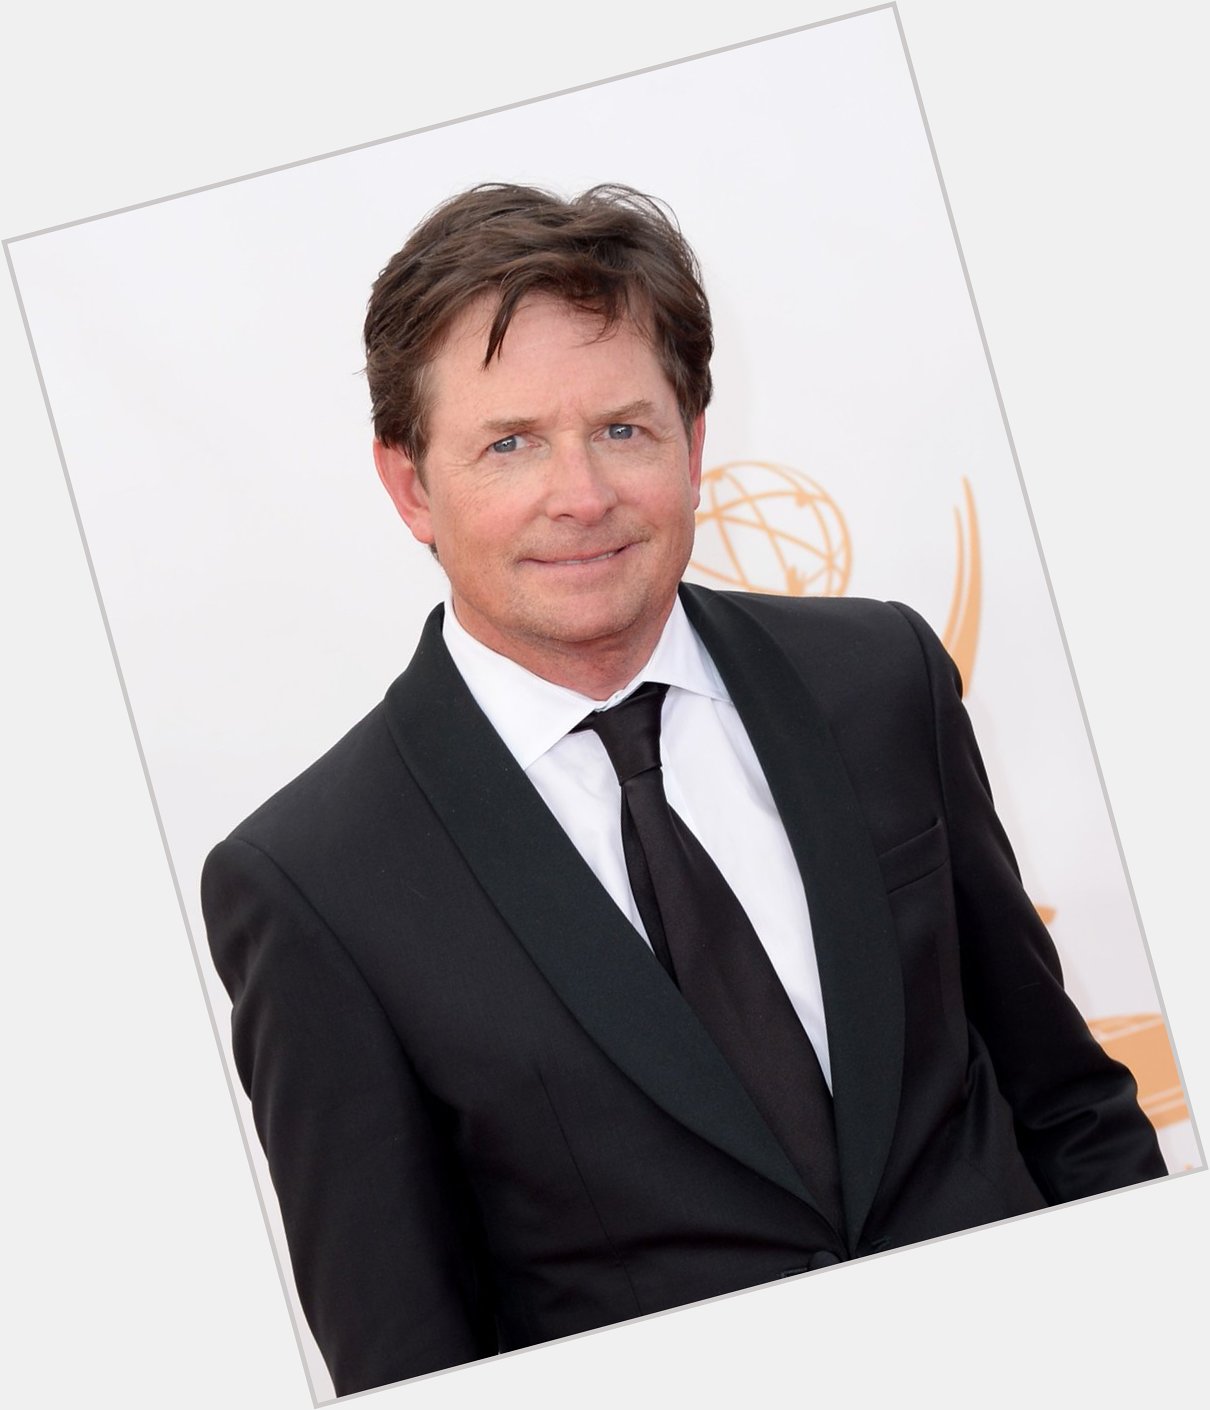 Let\s wish a very happy birthday to Michael J. Fox who plays Marty McFly in the trilogy! 